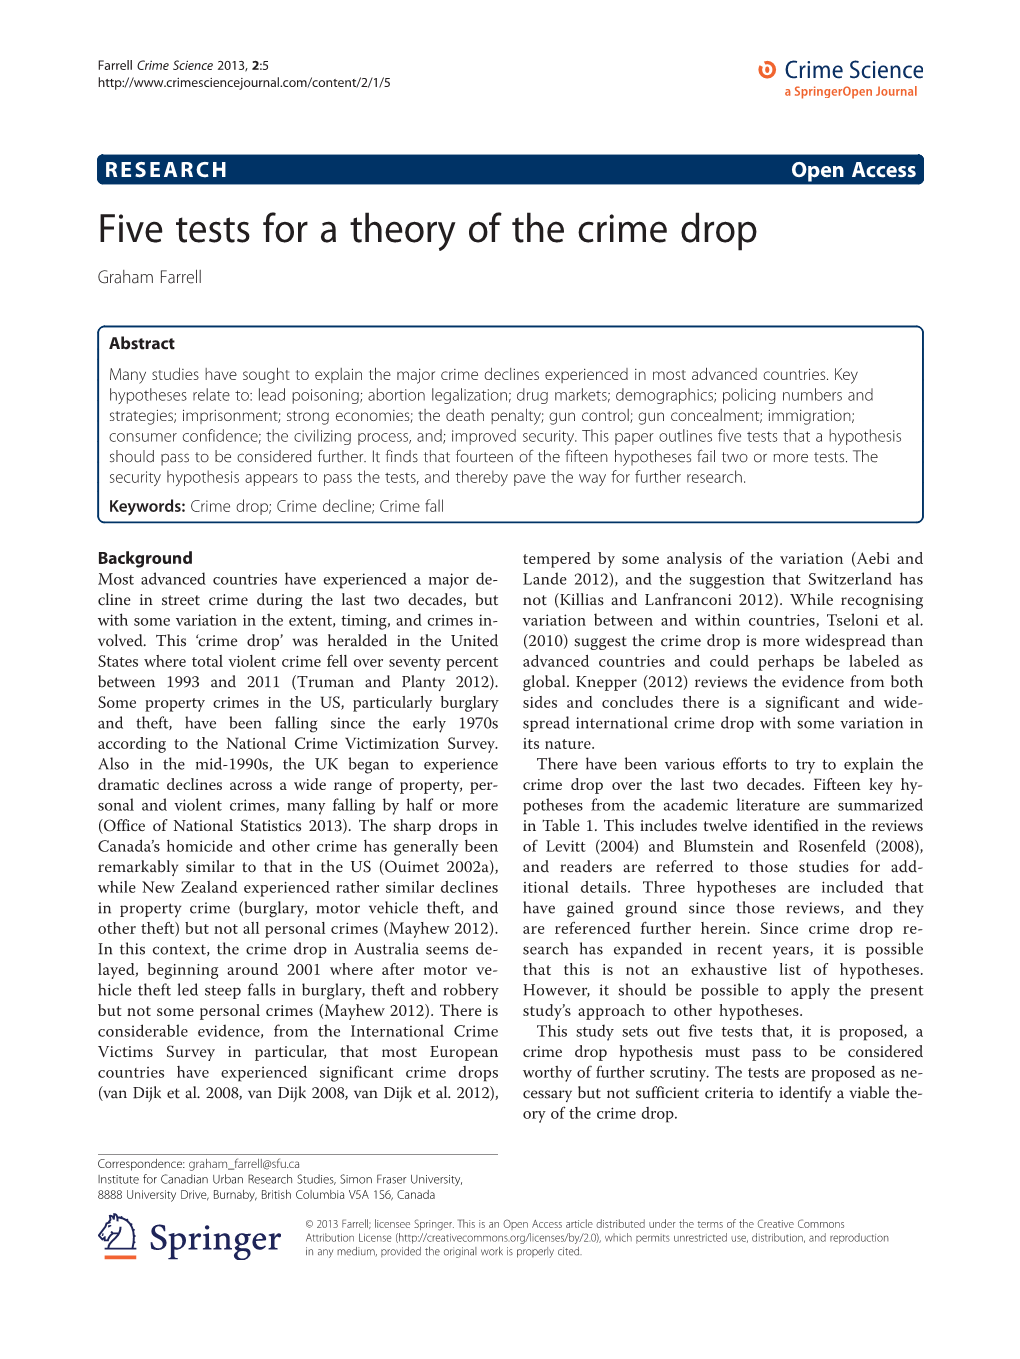 Five Tests for a Theory of the Crime Drop Graham Farrell